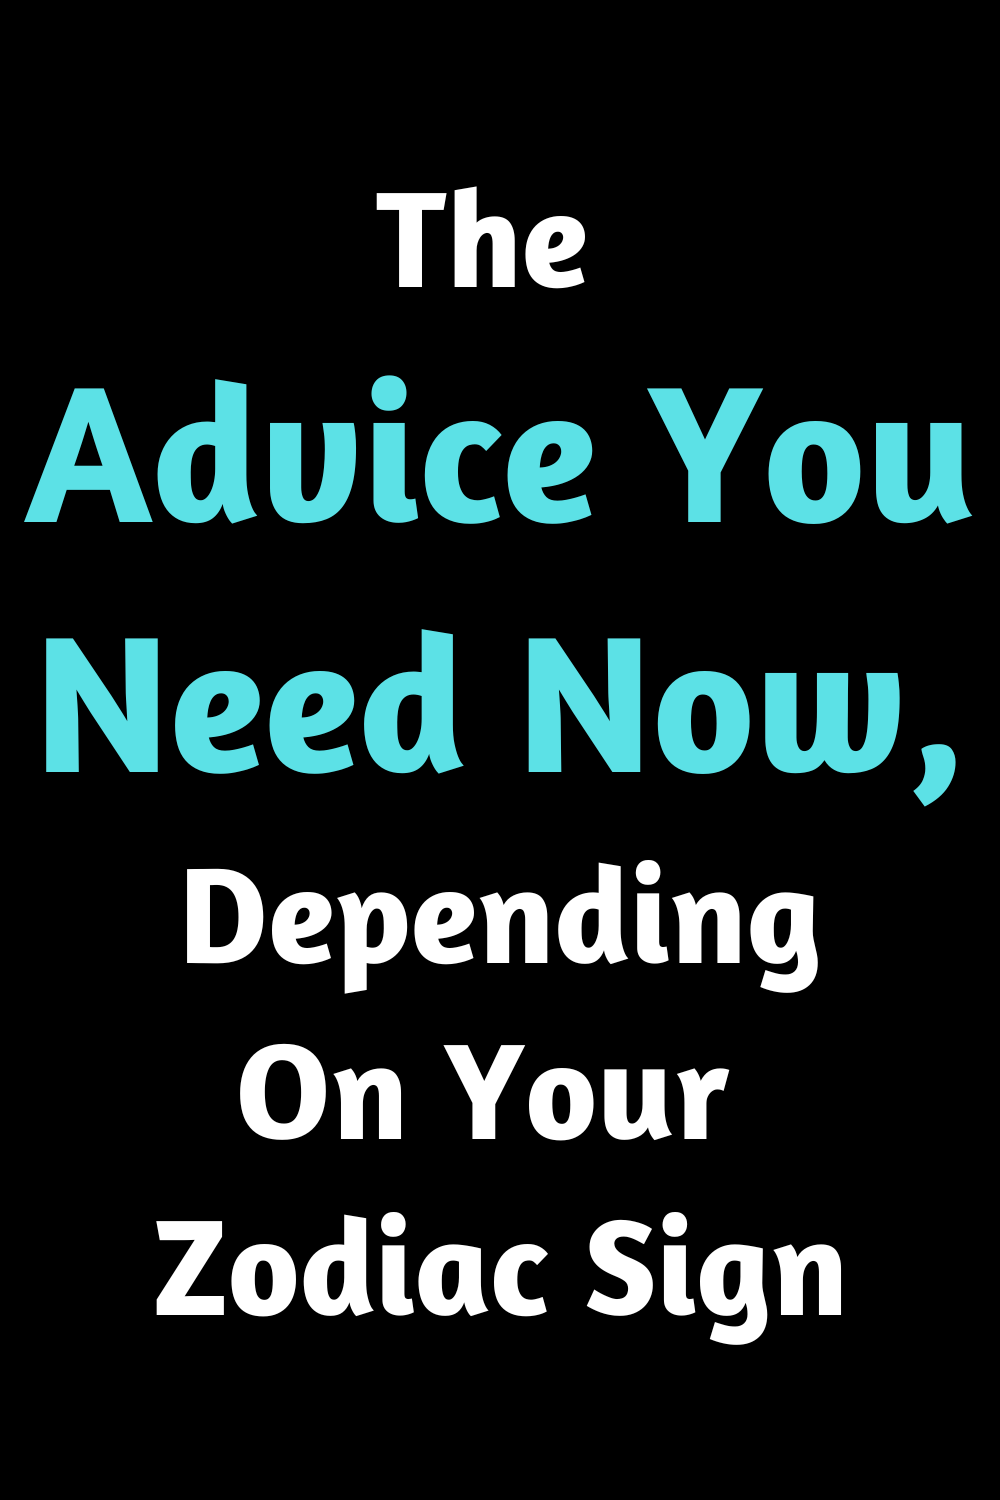 The Advice You Need Now, Depending On Your Zodiac Sign